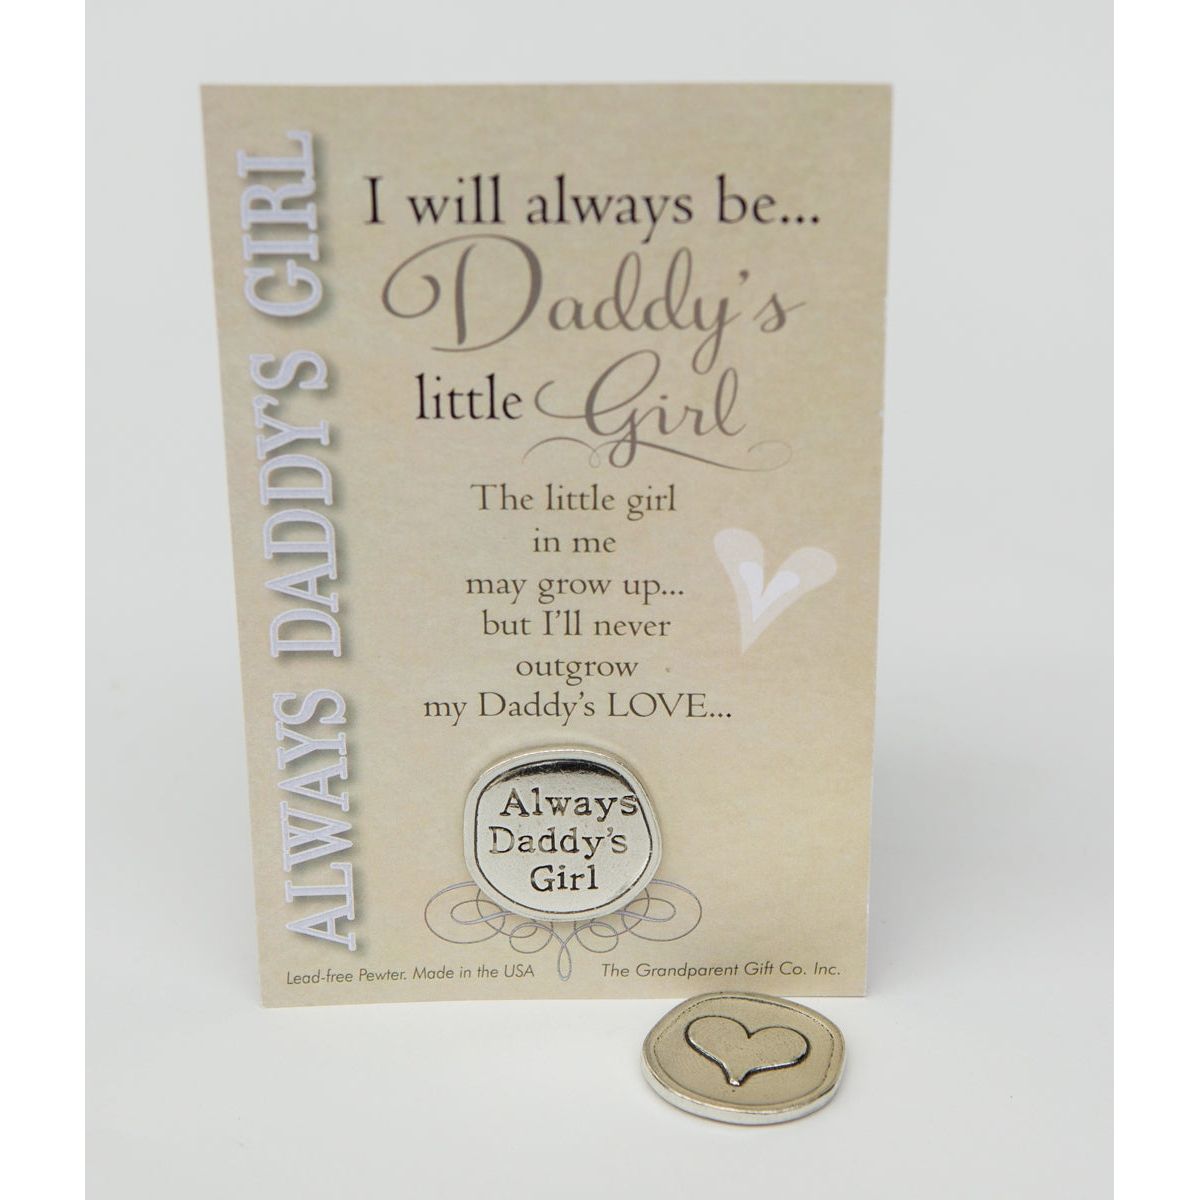 Gift for Dad frpm Daughter: Handmade pewter coin with &quot;Always Daddy&#39;s Girl&quot; on one side and a heart on the other, packaged in a clear bag with &quot;I will always be...Daddy&#39;s little Girl&quot; poem.